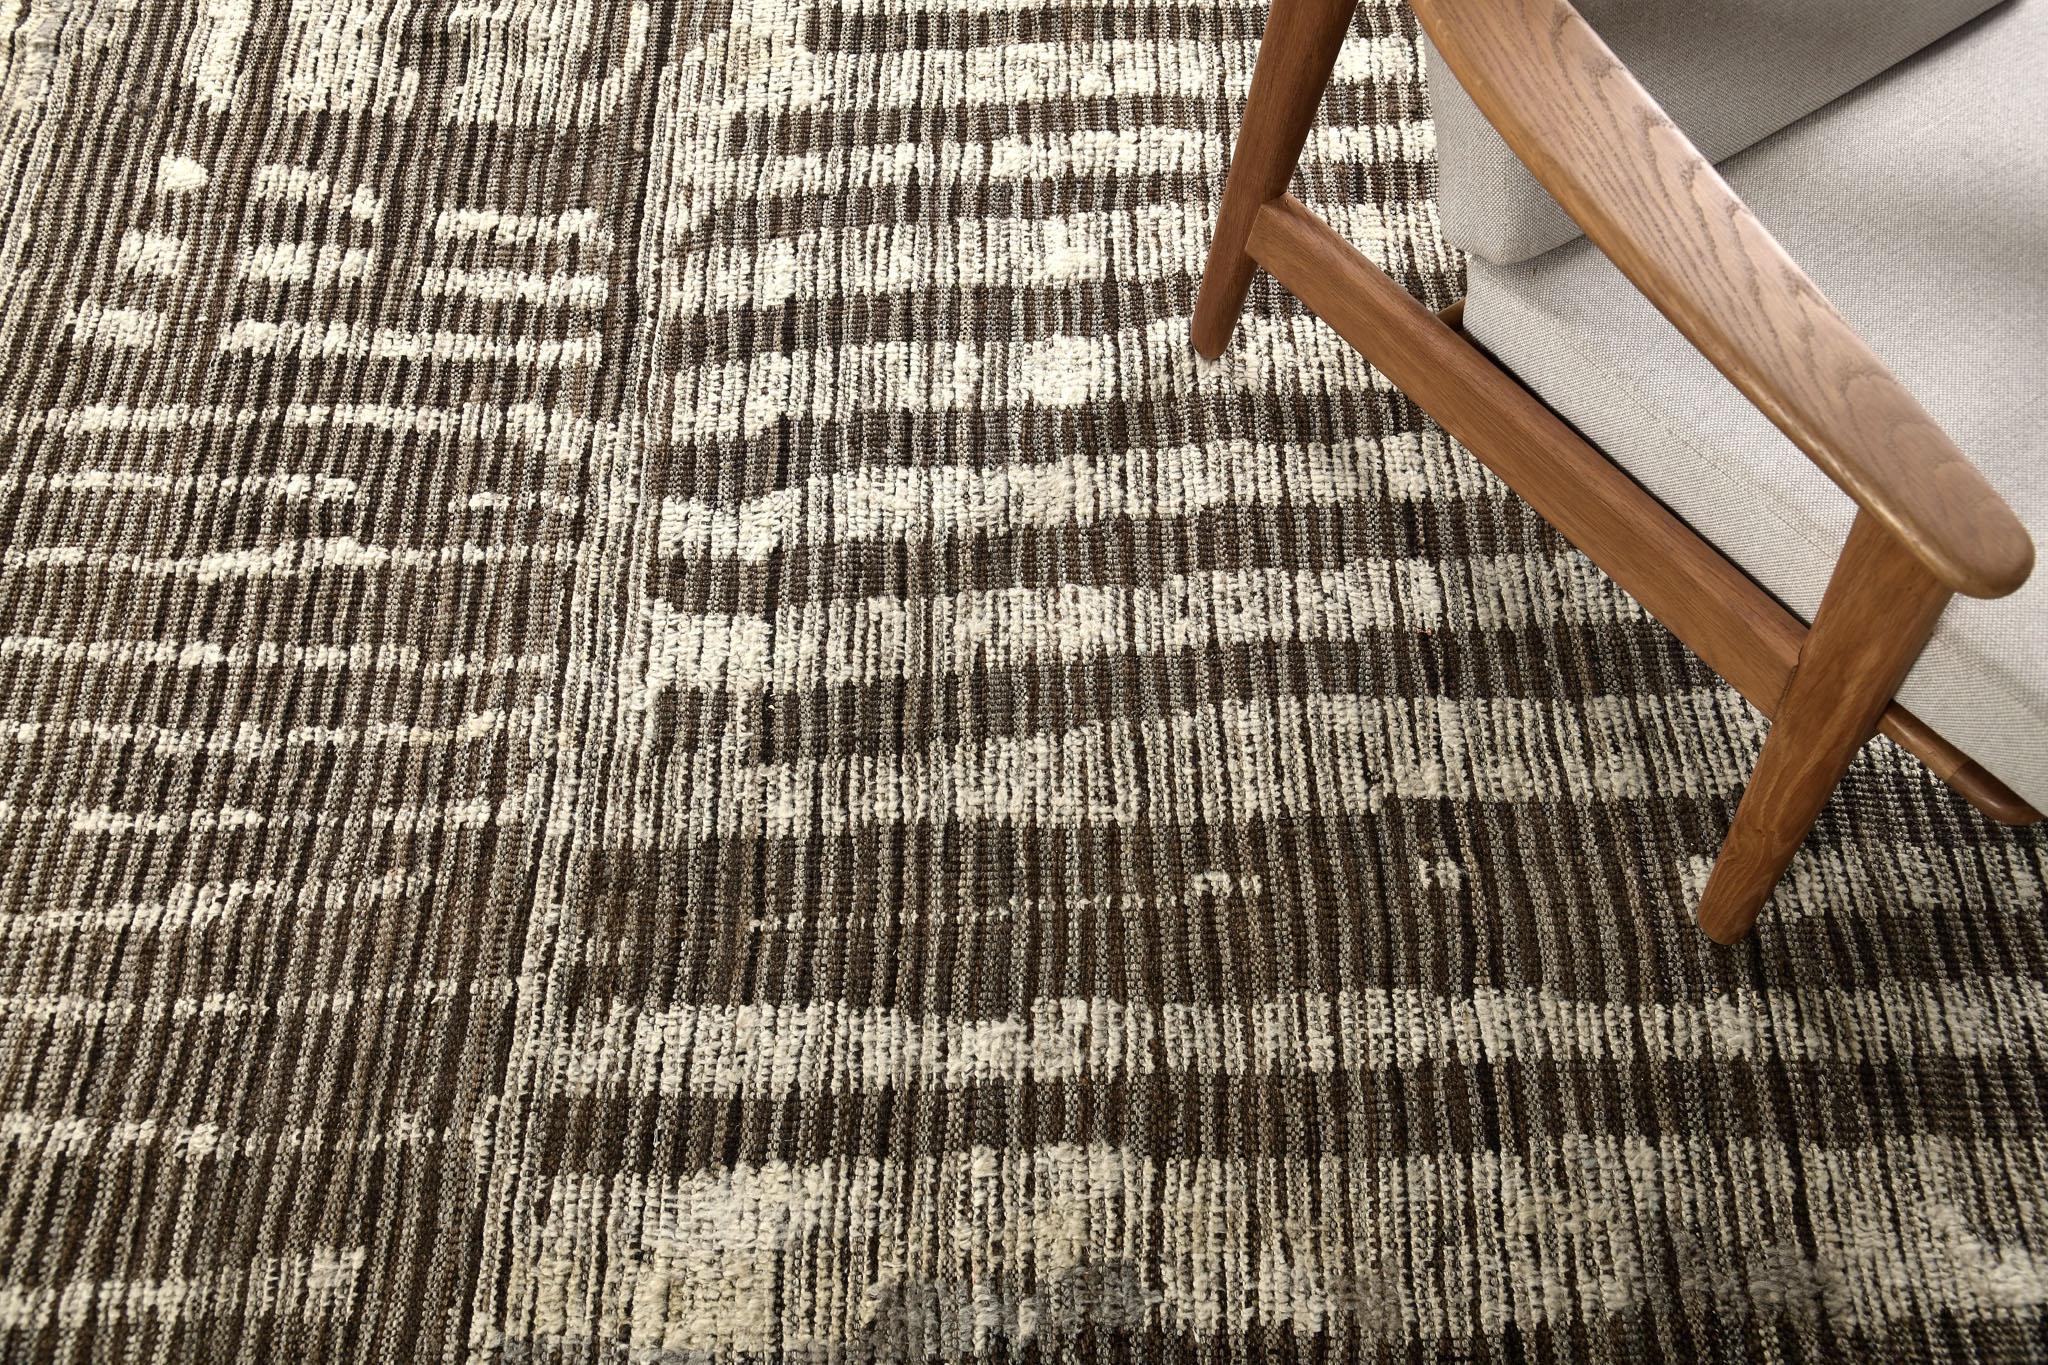 Tamarix is made of elegant wool and timeless design elements. The weaving of neutral tones and contemporary elements is what makes the Atlas Collection so unique and sought after. Mehraban's Atlas collection is noted for its saturated color,